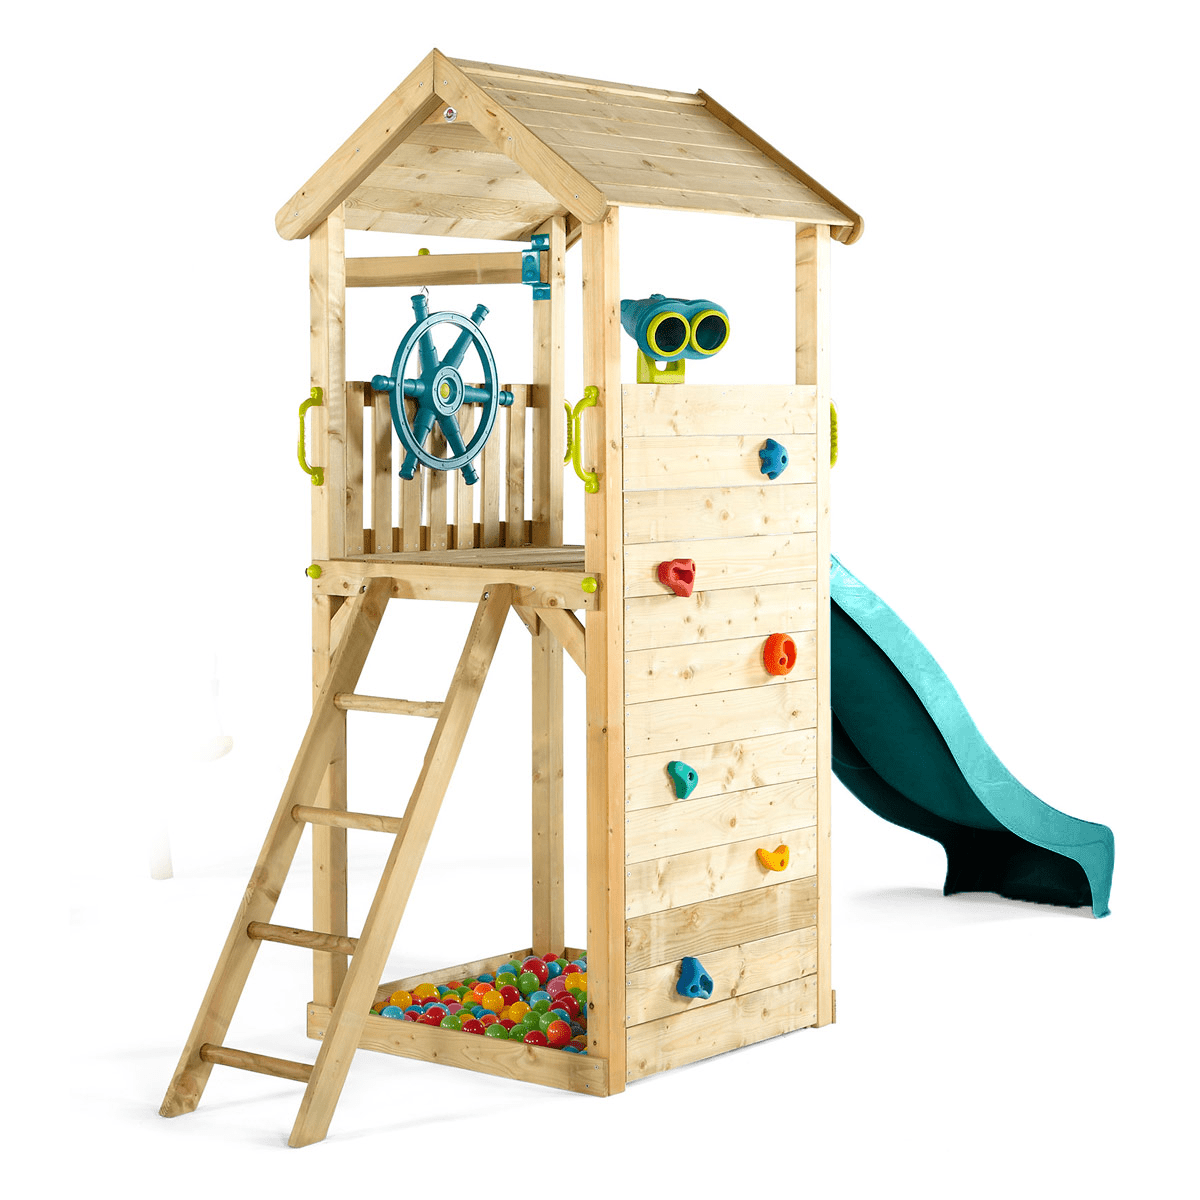 Plum Wooden Lookout Tower with Slide: Imaginative Play and Fun